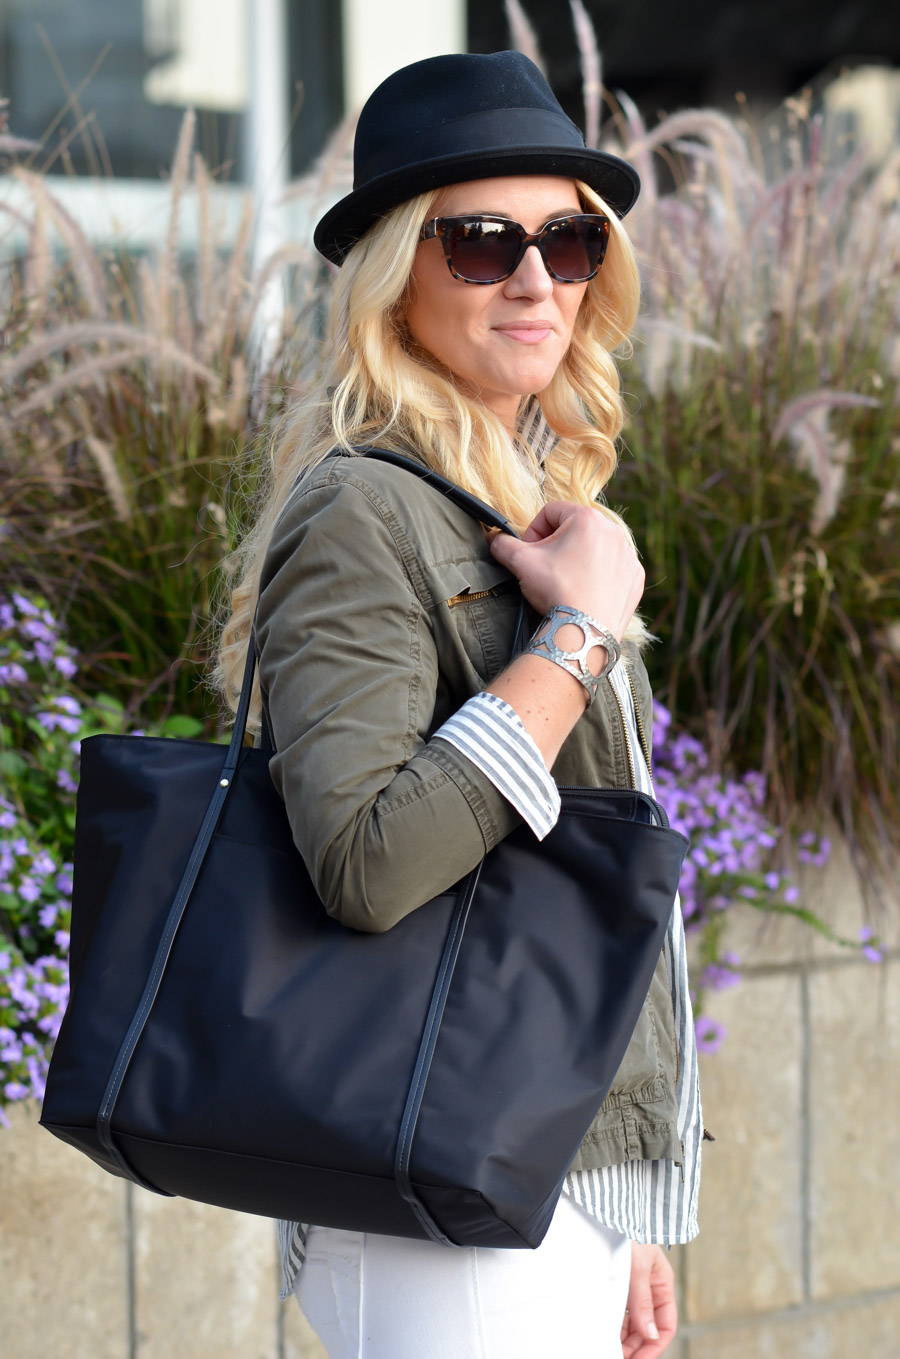 Best Travel Bags for Stylish Women. Chic Work Laptop Tote- Samsonite Lyssa Tote Review